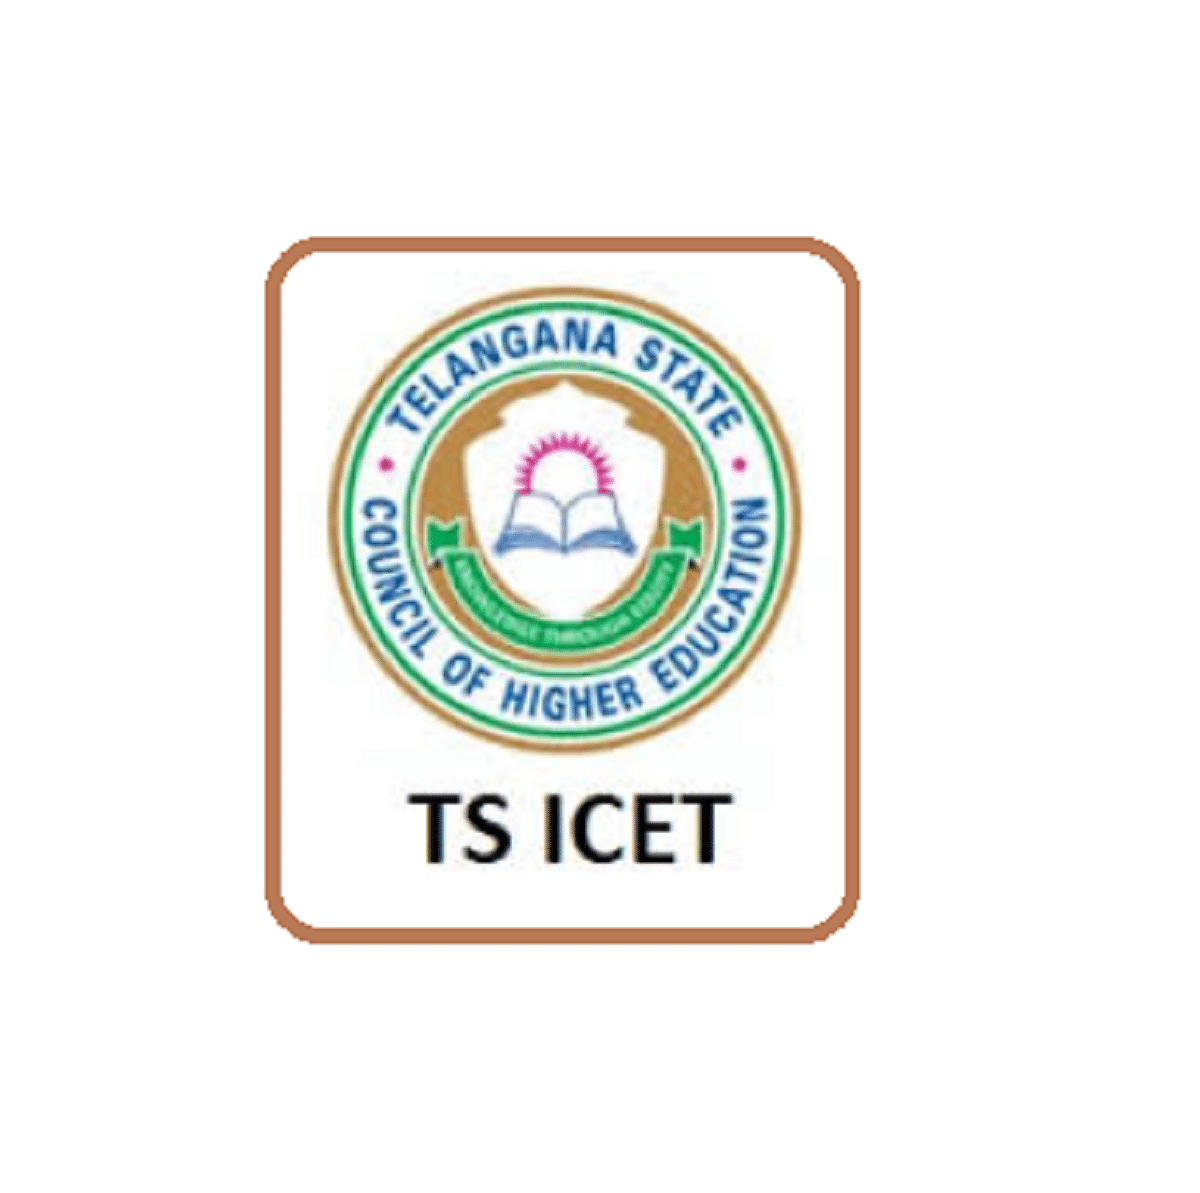 TS ICET 2022: Application Edit Window Opens, Know How to Modify Form Details Here